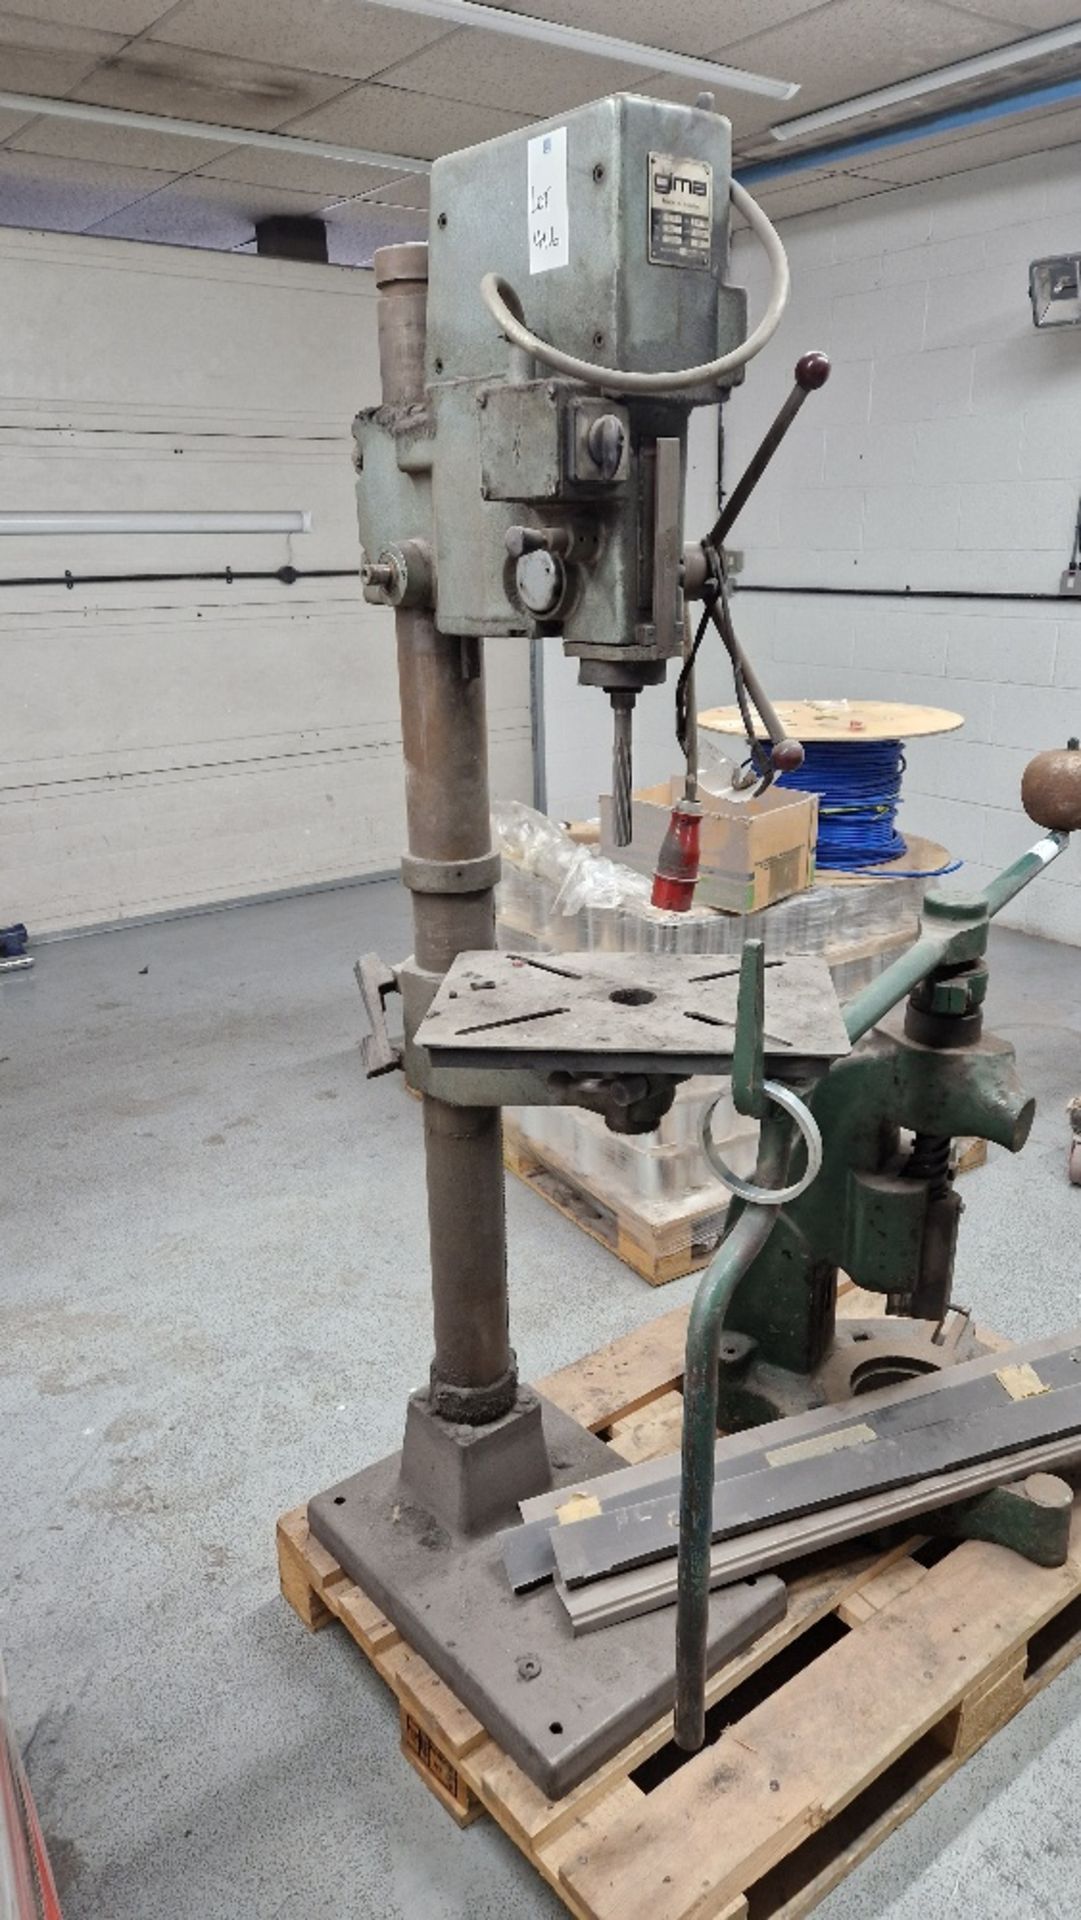 GIMA PEDESTAL DRILL *** PLEASE NOTE THIS ASSET IS LOCATED IN COVENTRY - CV7 *** ACCESS WILL BE GIVEN